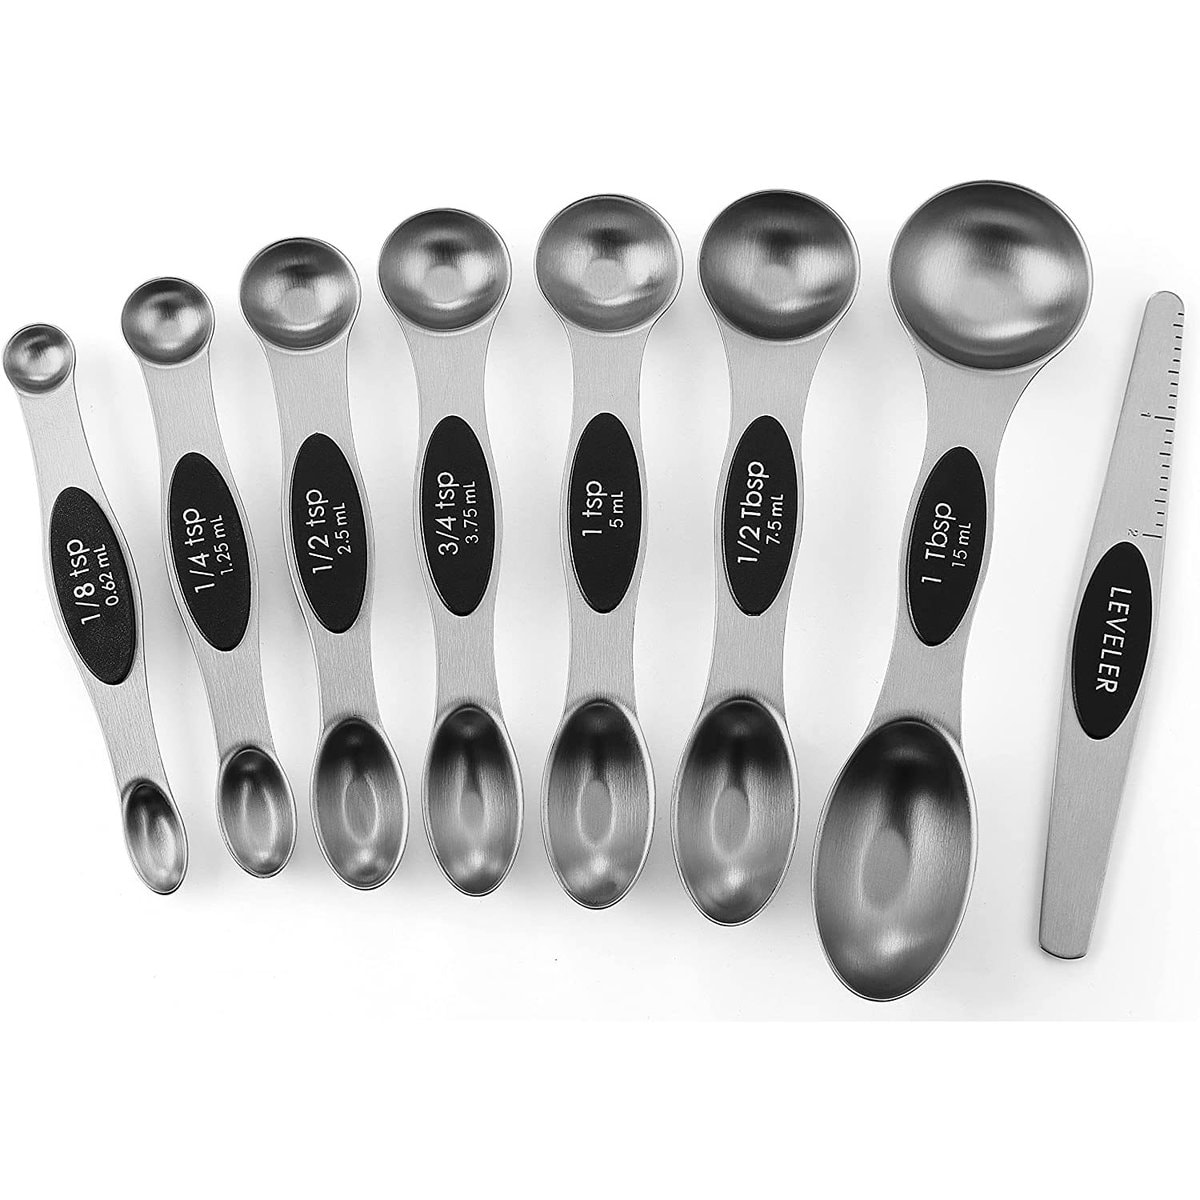 Magnetic measuring spoons.